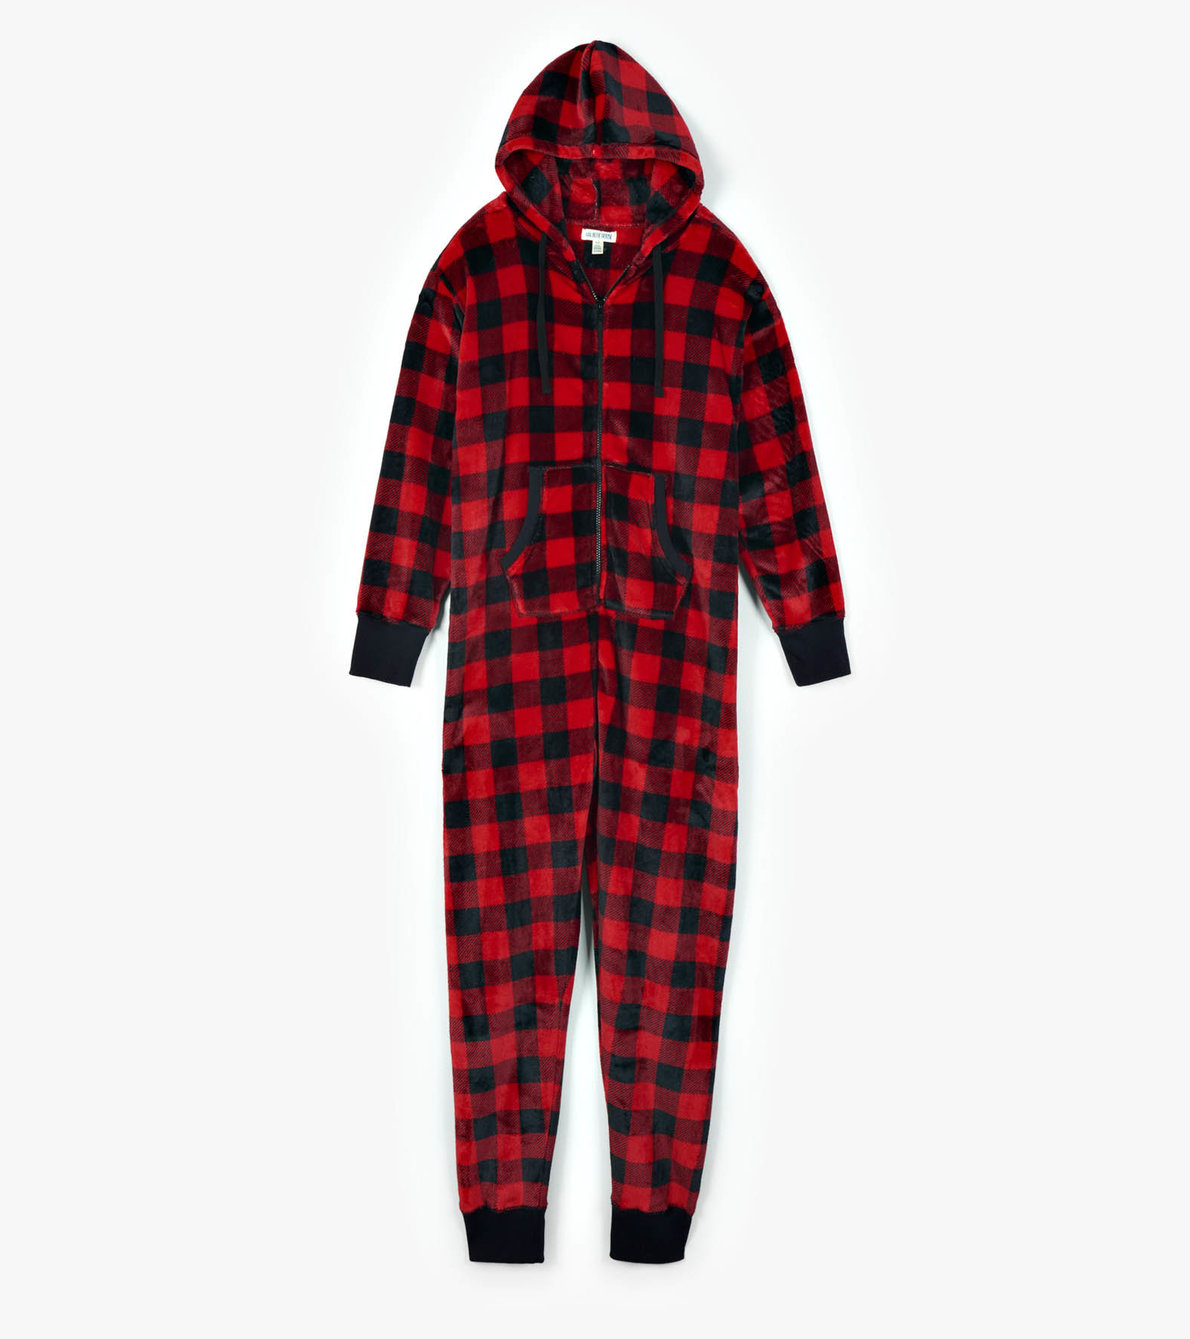 View larger image of Buffalo Plaid Adult Hooded Fleece Jumpsuit